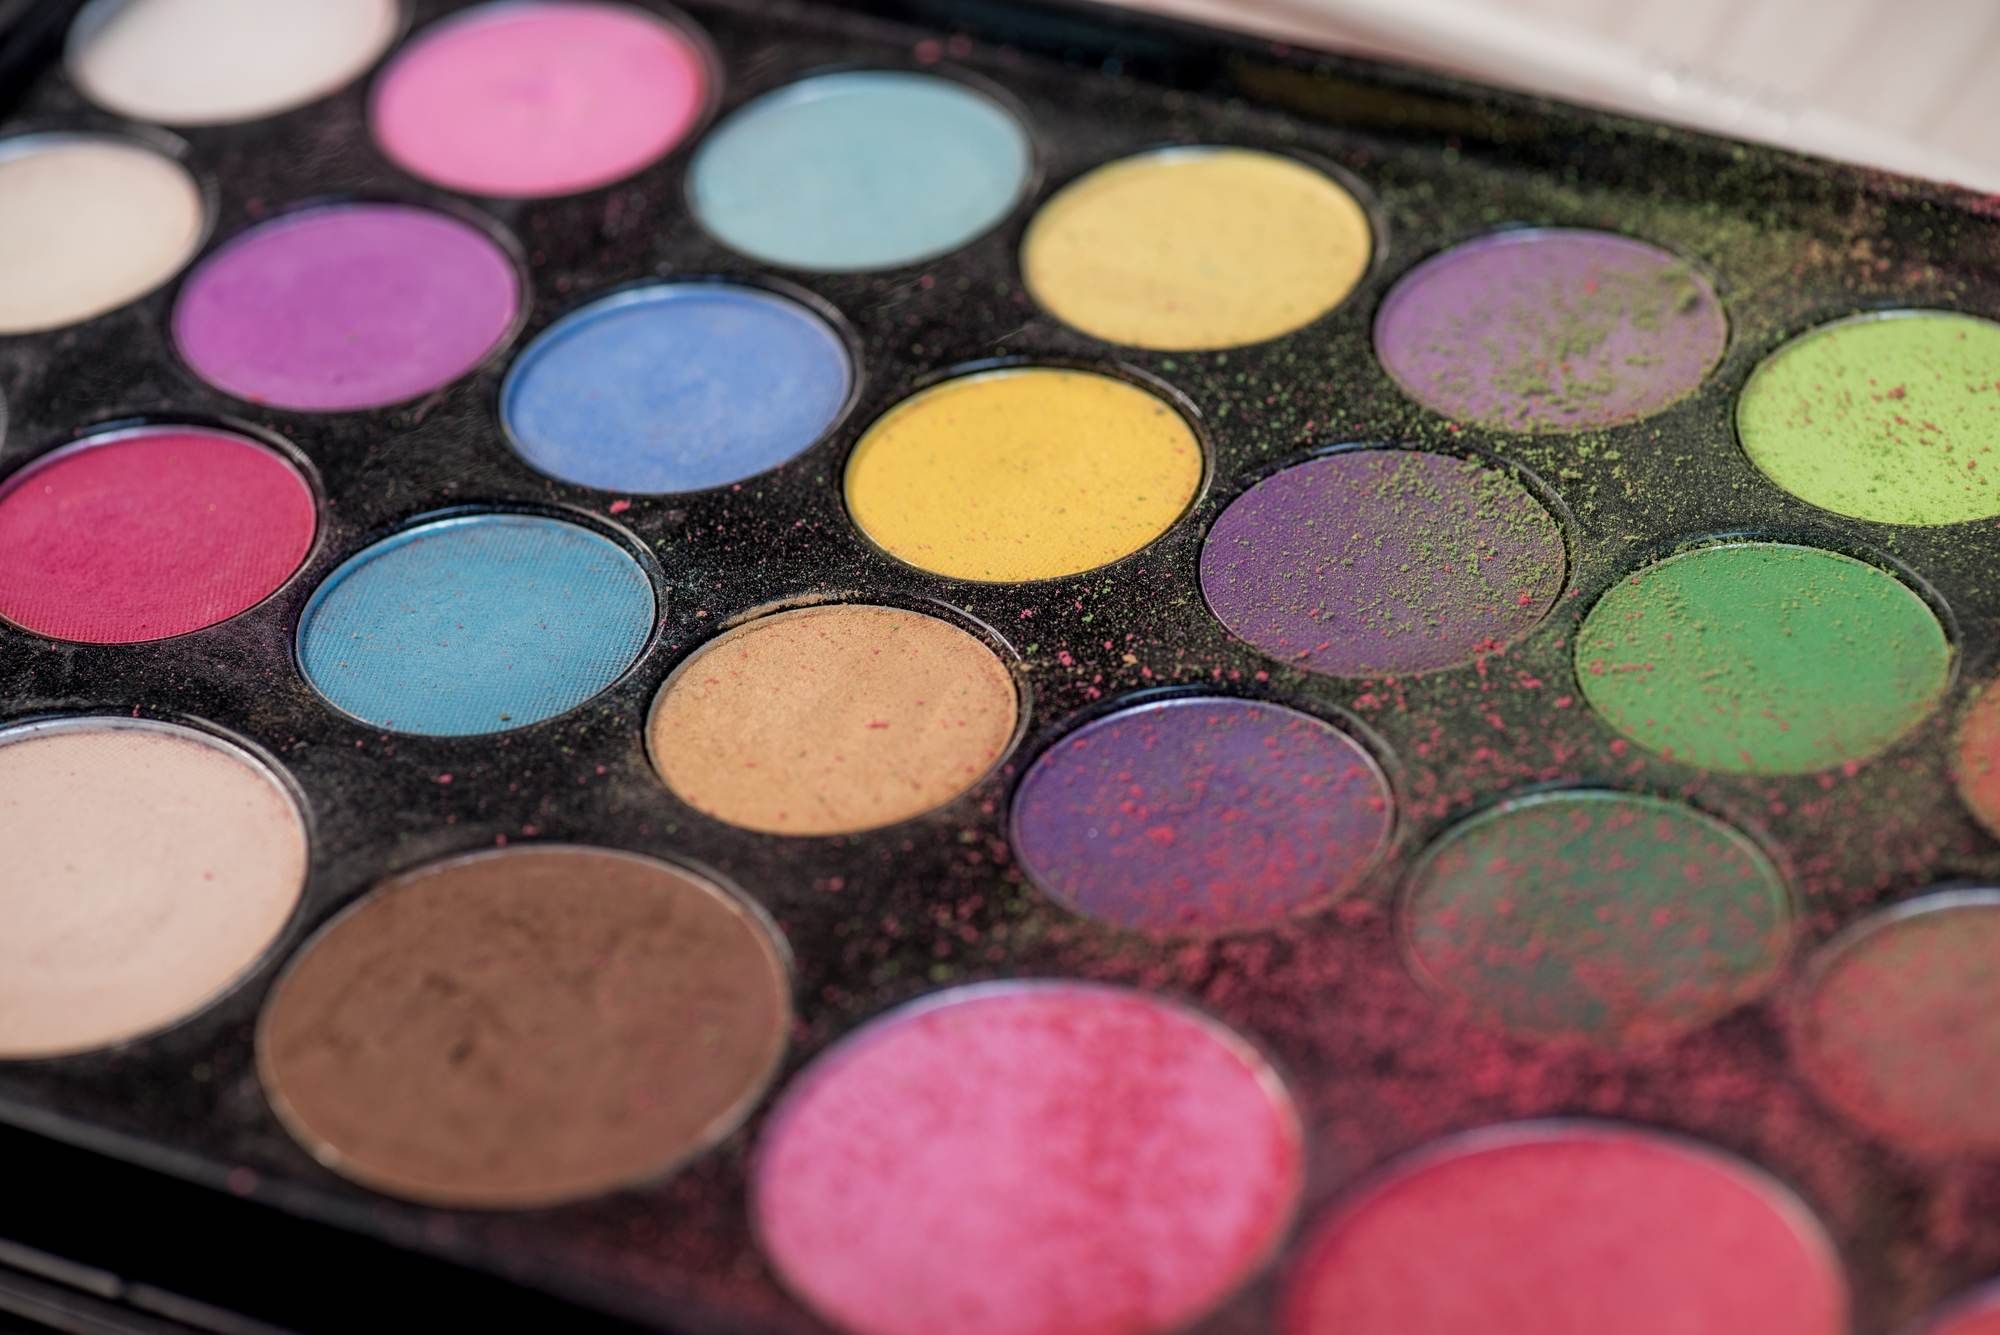 Some Jmkcoz eye shadow palettes may be tainted with asbestos.